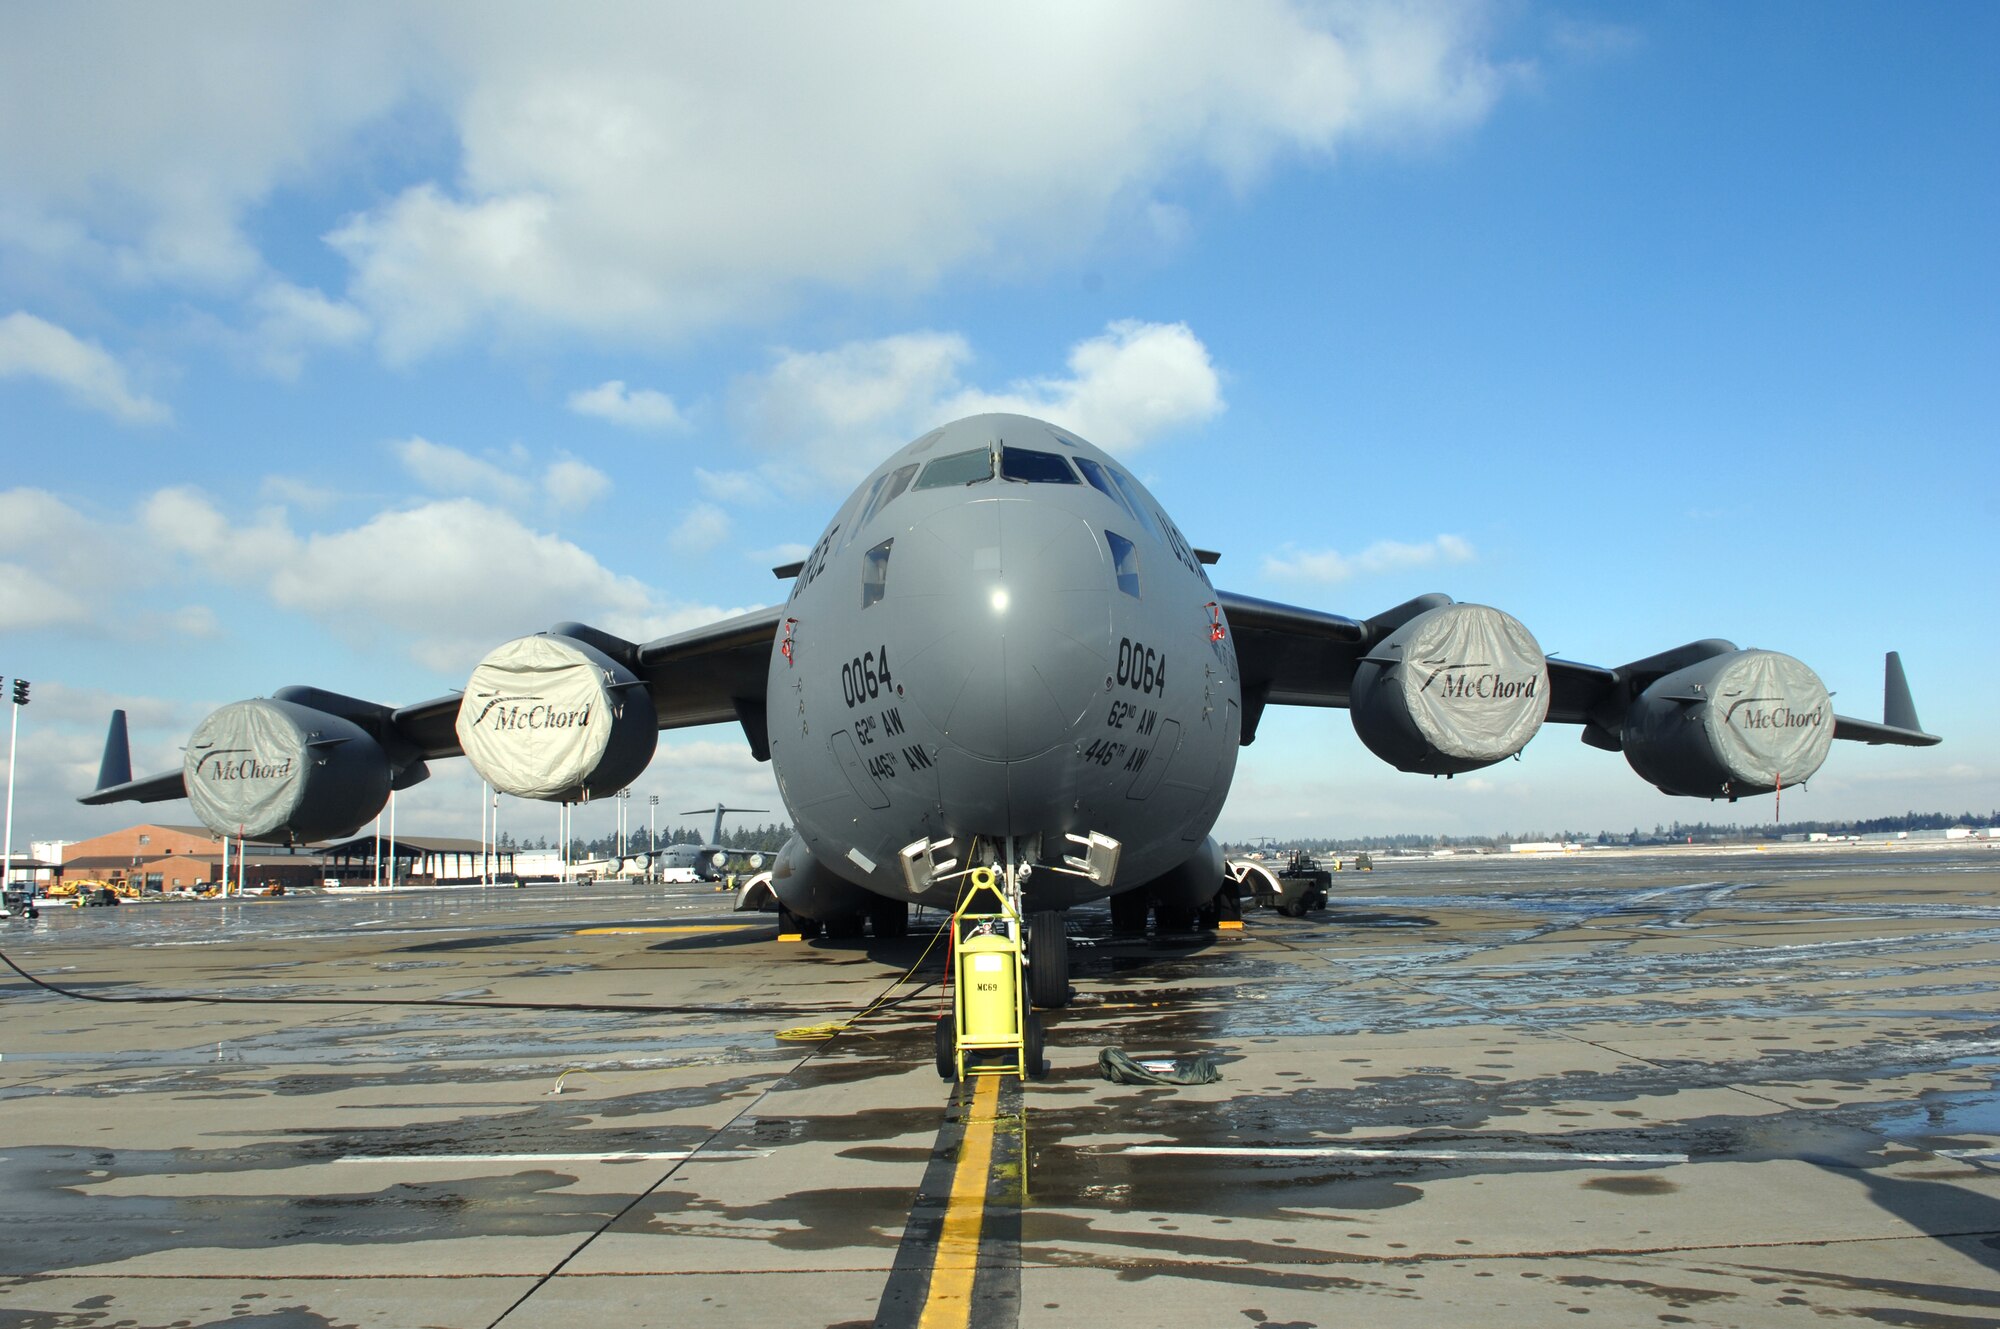 A C-17 Globemaster III sits on the fllightline Jan. 12 at McChord Air Force Base, Wash. Each day, hundreds of McChord AFB Airmen support the global airlift mission from locations around the world. (U.S. Air Force photo/Abner Guzman)